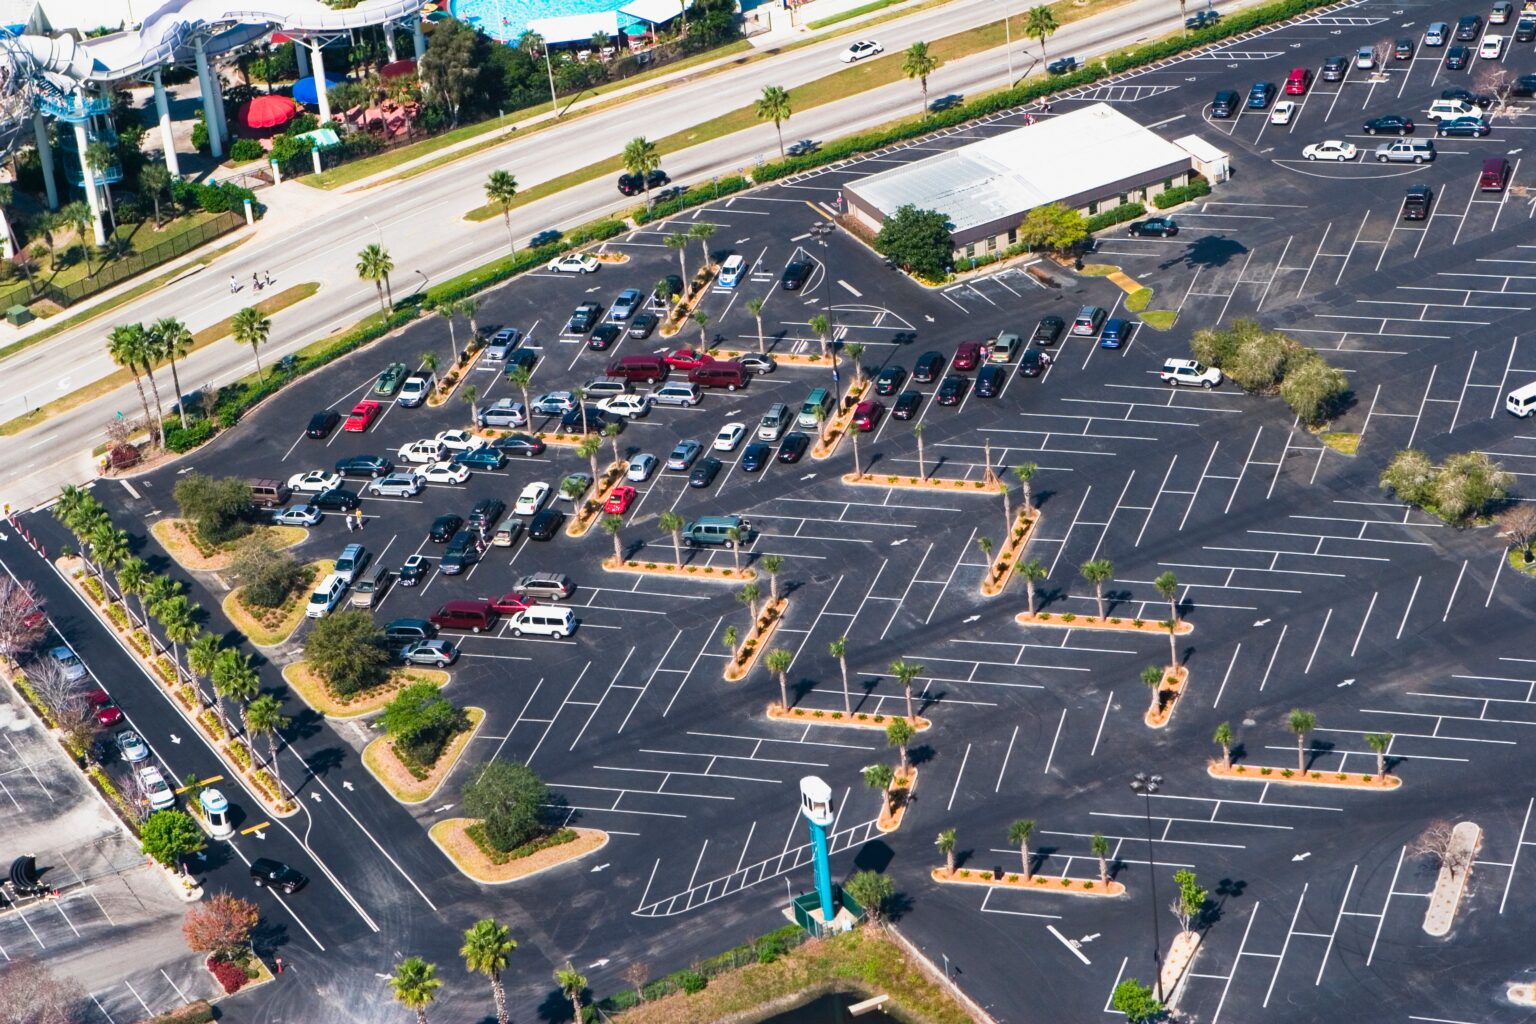 Parking Lots Cause More Heat and Flooding--Here's How 100 U.S. Cities Rank